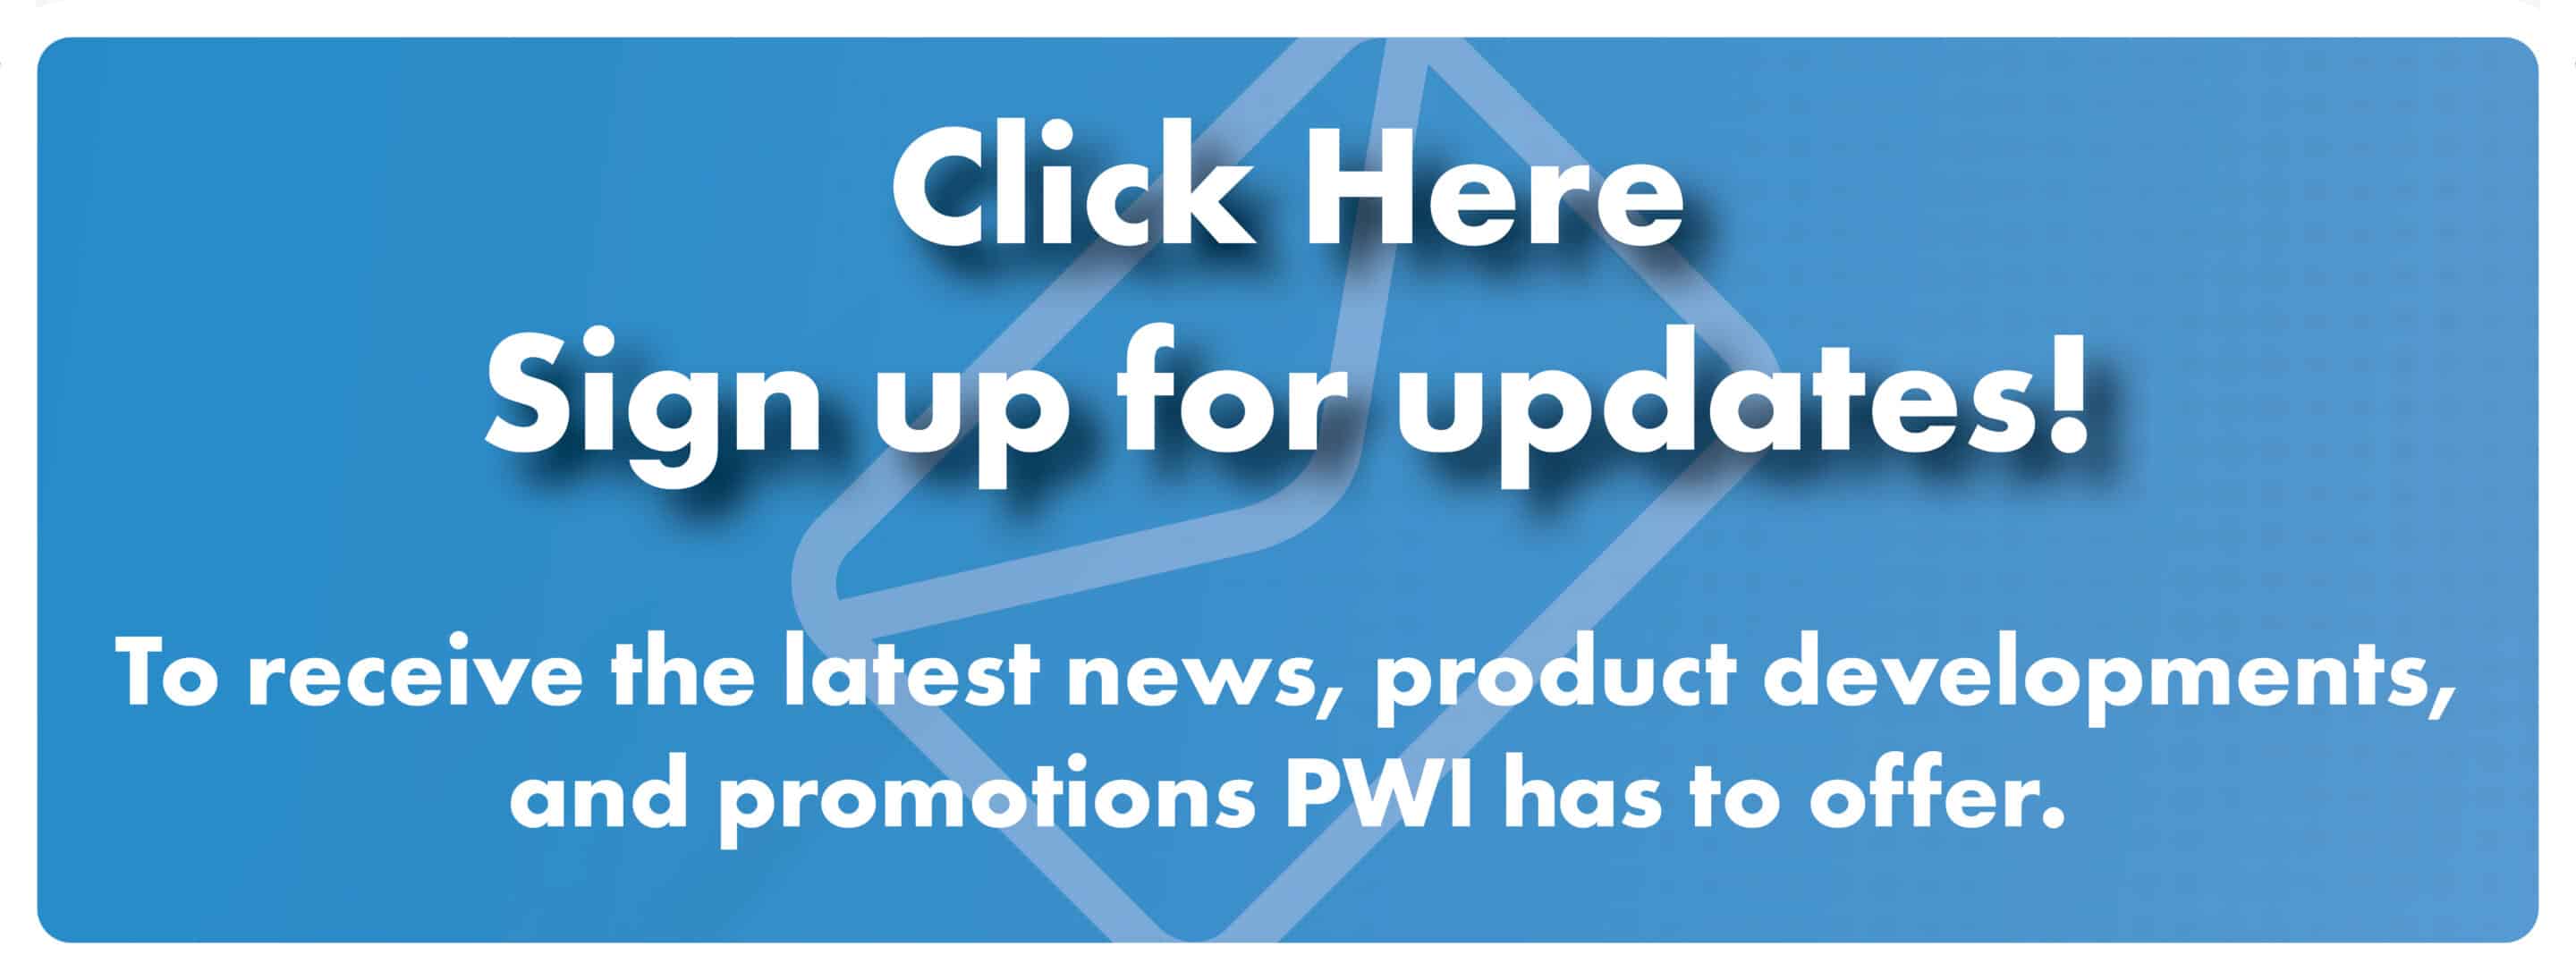 Don't miss out on all the Updates fromPWI!